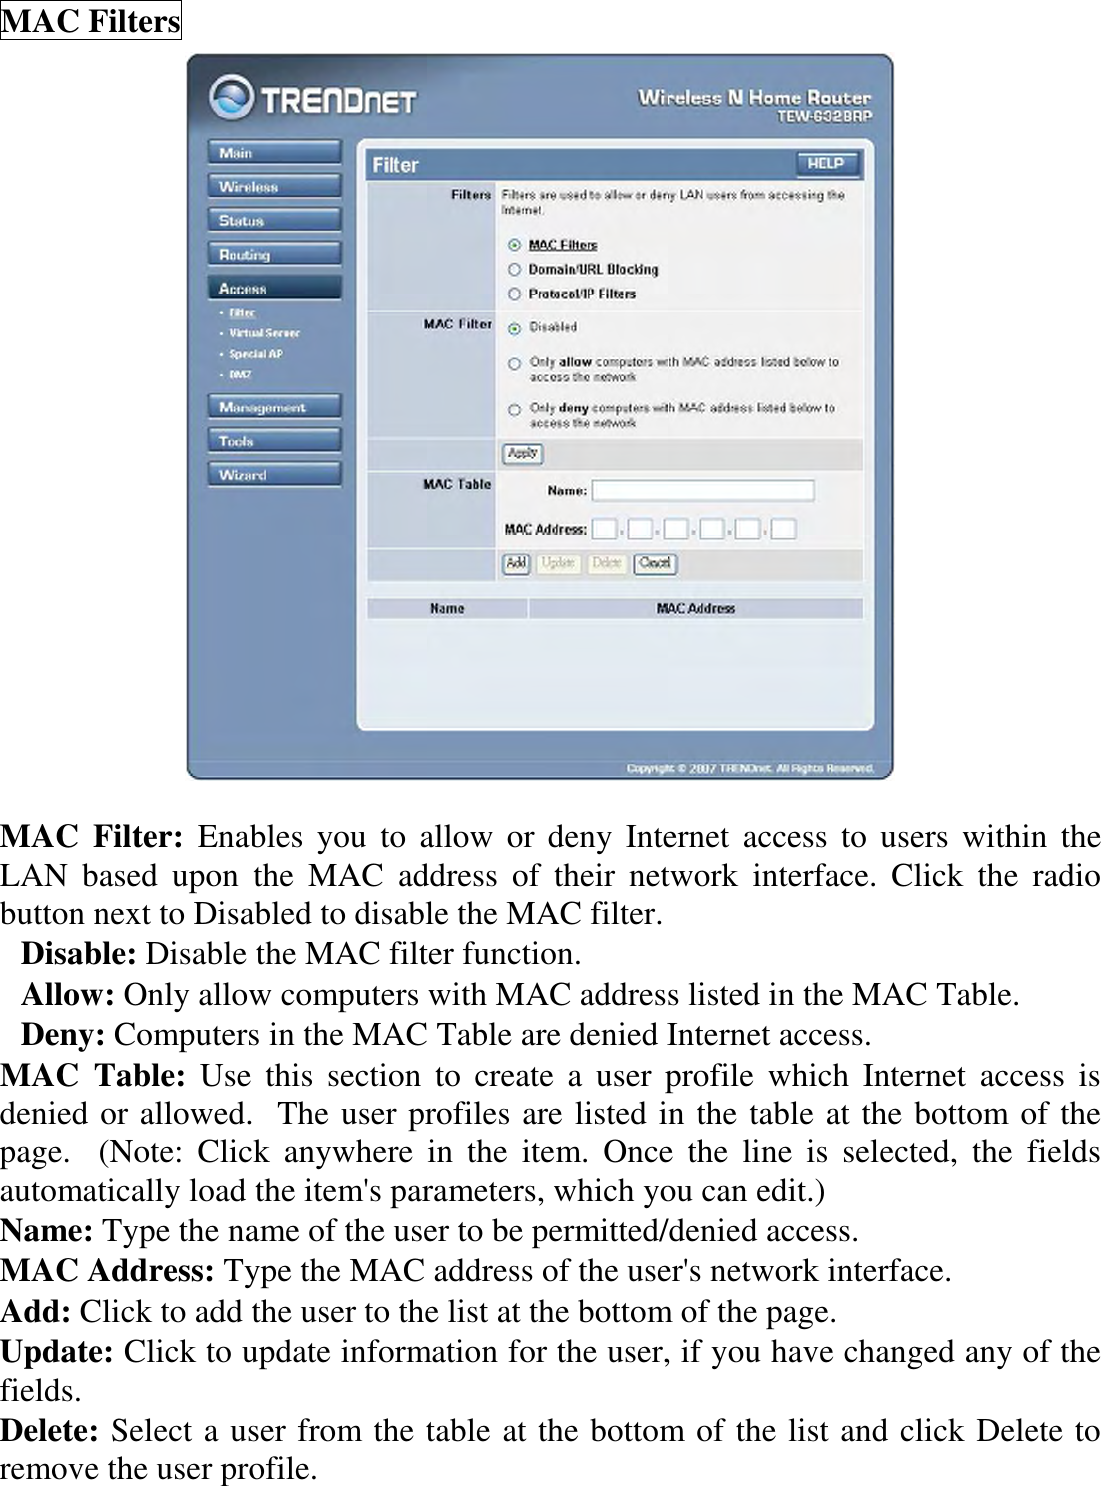 MAC Filters   MAC  Filter:  Enables  you  to allow or  deny  Internet  access  to  users  within  the LAN  based  upon  the  MAC  address  of  their  network  interface.  Click  the  radio button next to Disabled to disable the MAC filter. Disable: Disable the MAC filter function. Allow: Only allow computers with MAC address listed in the MAC Table. Deny: Computers in the MAC Table are denied Internet access. MAC  Table:  Use  this  section  to  create  a  user  profile  which  Internet  access  is denied or allowed.  The user profiles are listed in the table at the bottom of the page.    (Note:  Click  anywhere  in  the  item.  Once  the  line  is  selected,  the  fields automatically load the item&apos;s parameters, which you can edit.) Name: Type the name of the user to be permitted/denied access. MAC Address: Type the MAC address of the user&apos;s network interface. Add: Click to add the user to the list at the bottom of the page. Update: Click to update information for the user, if you have changed any of the fields. Delete: Select a user from the table at the bottom of the list and click Delete to remove the user profile. 